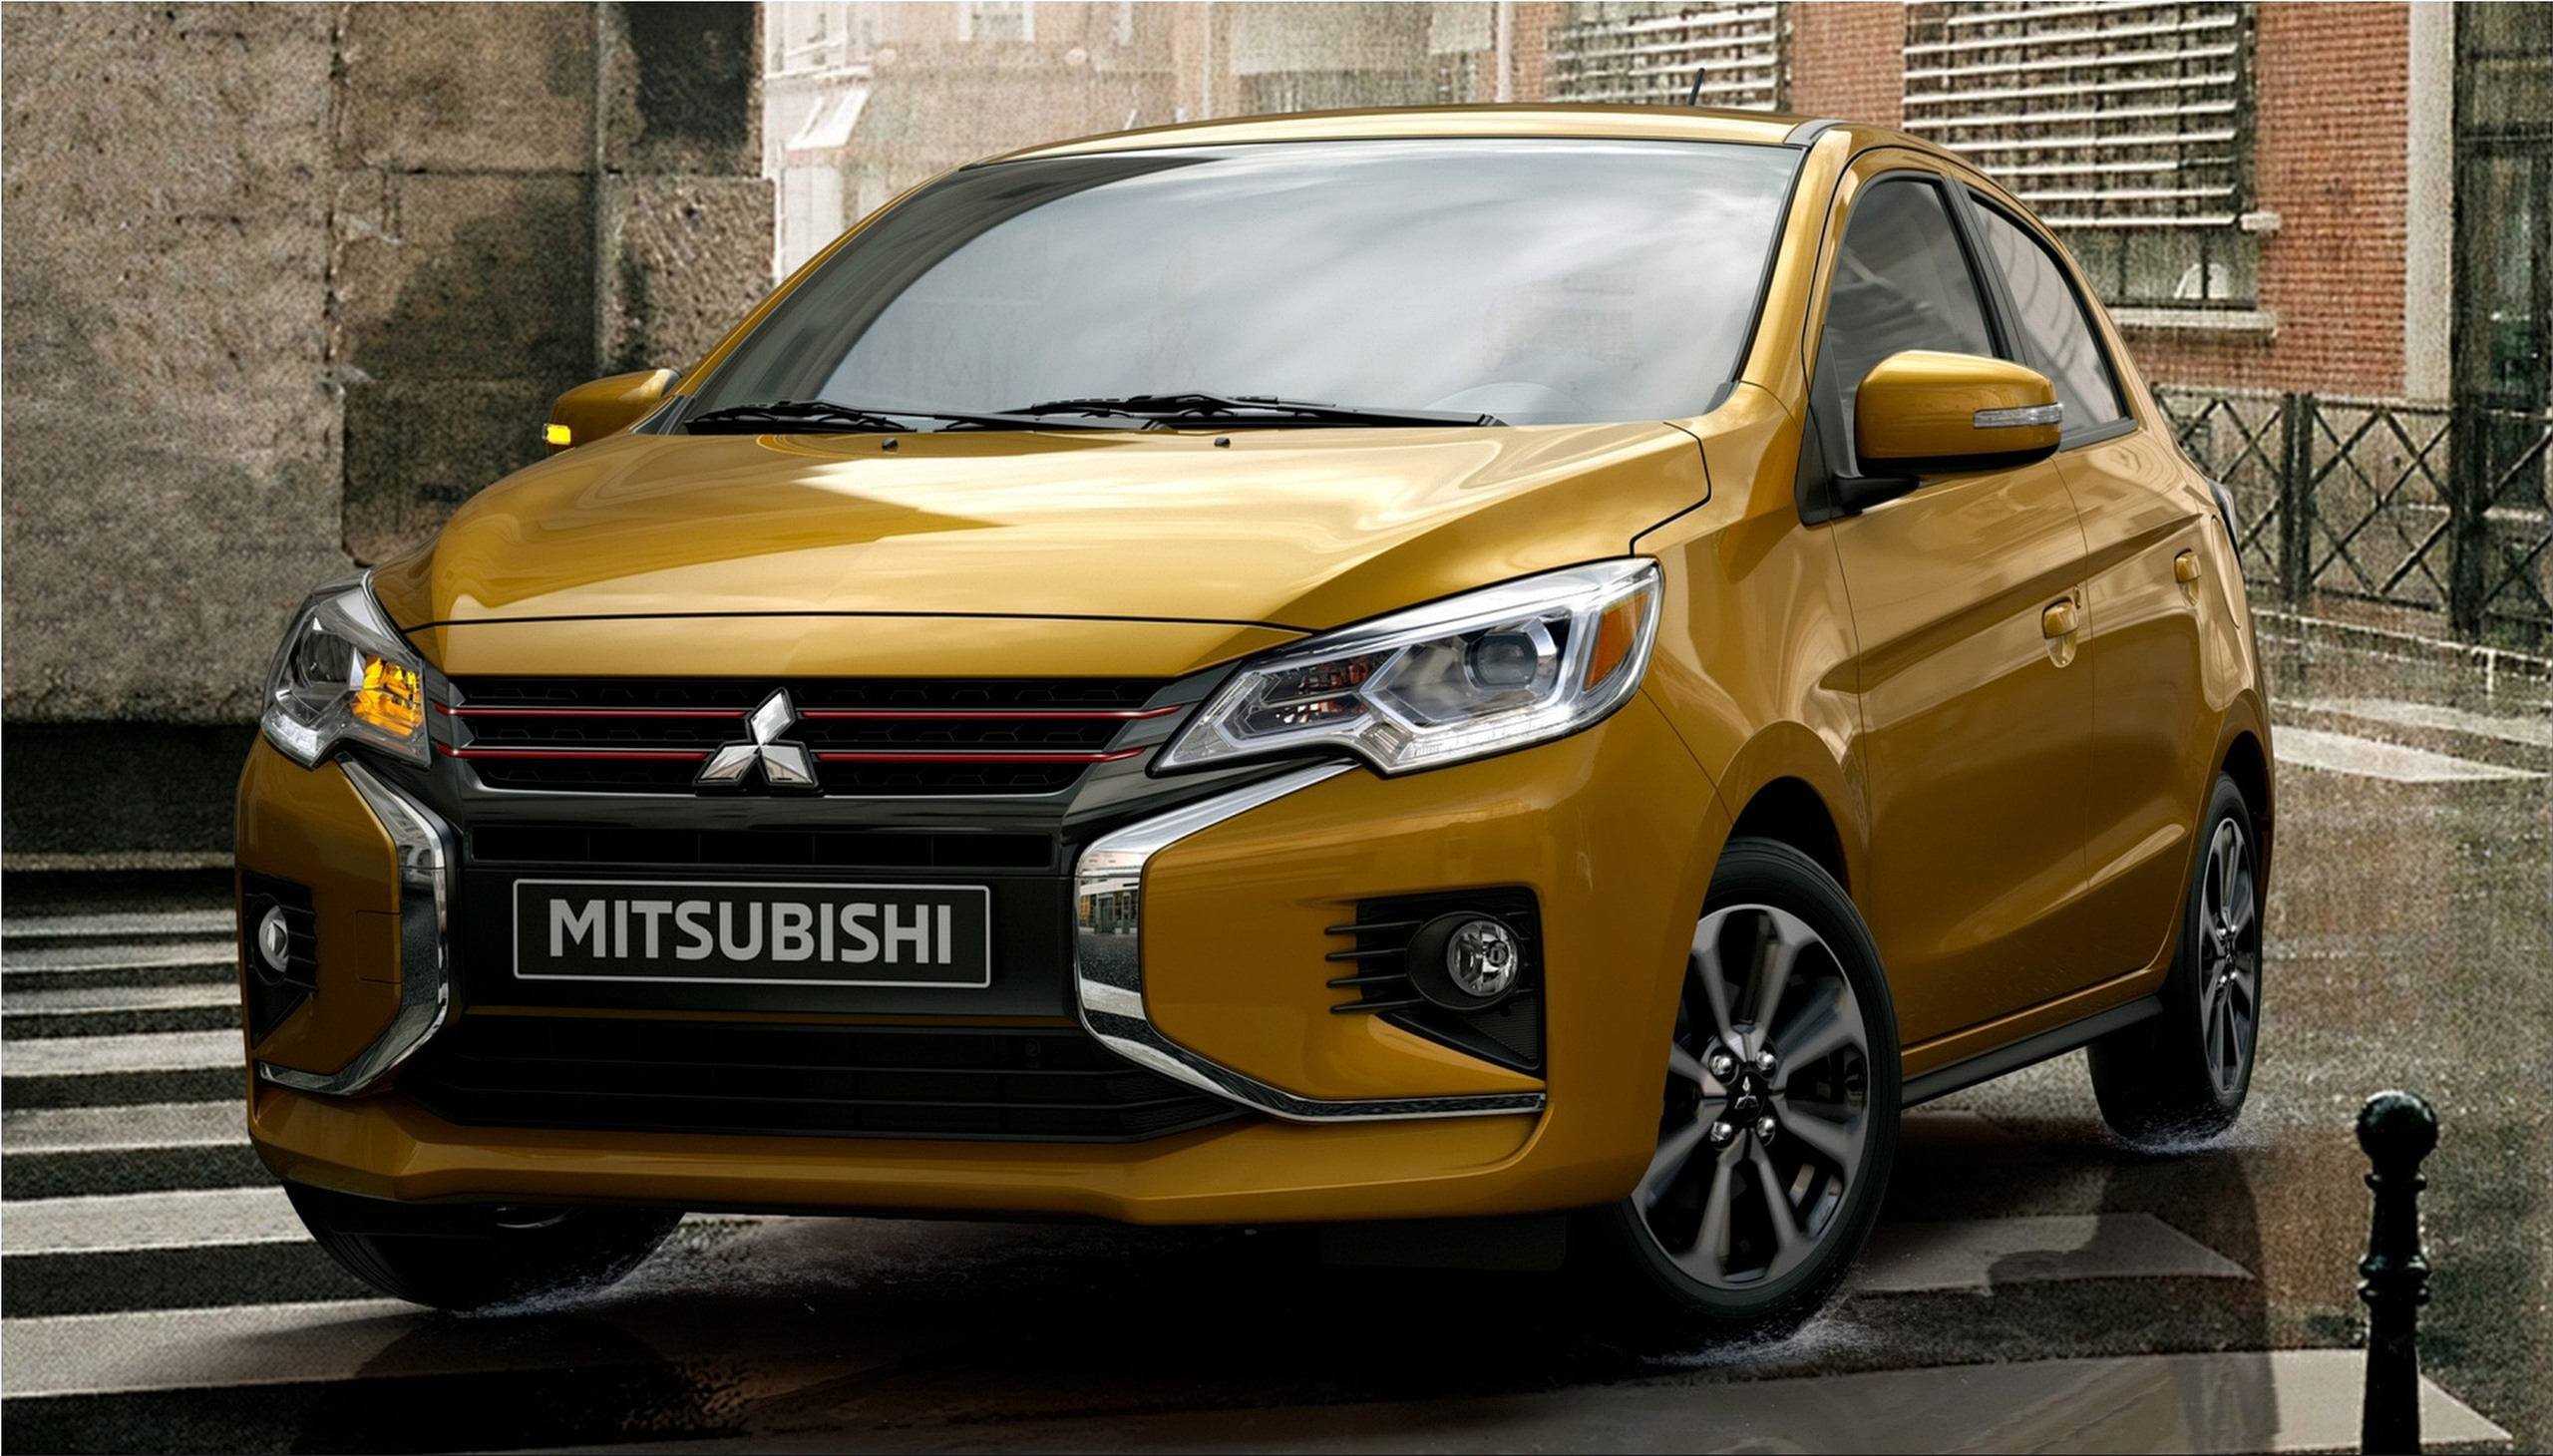 The new Mitsubishi Space Star is available for immediate delivery